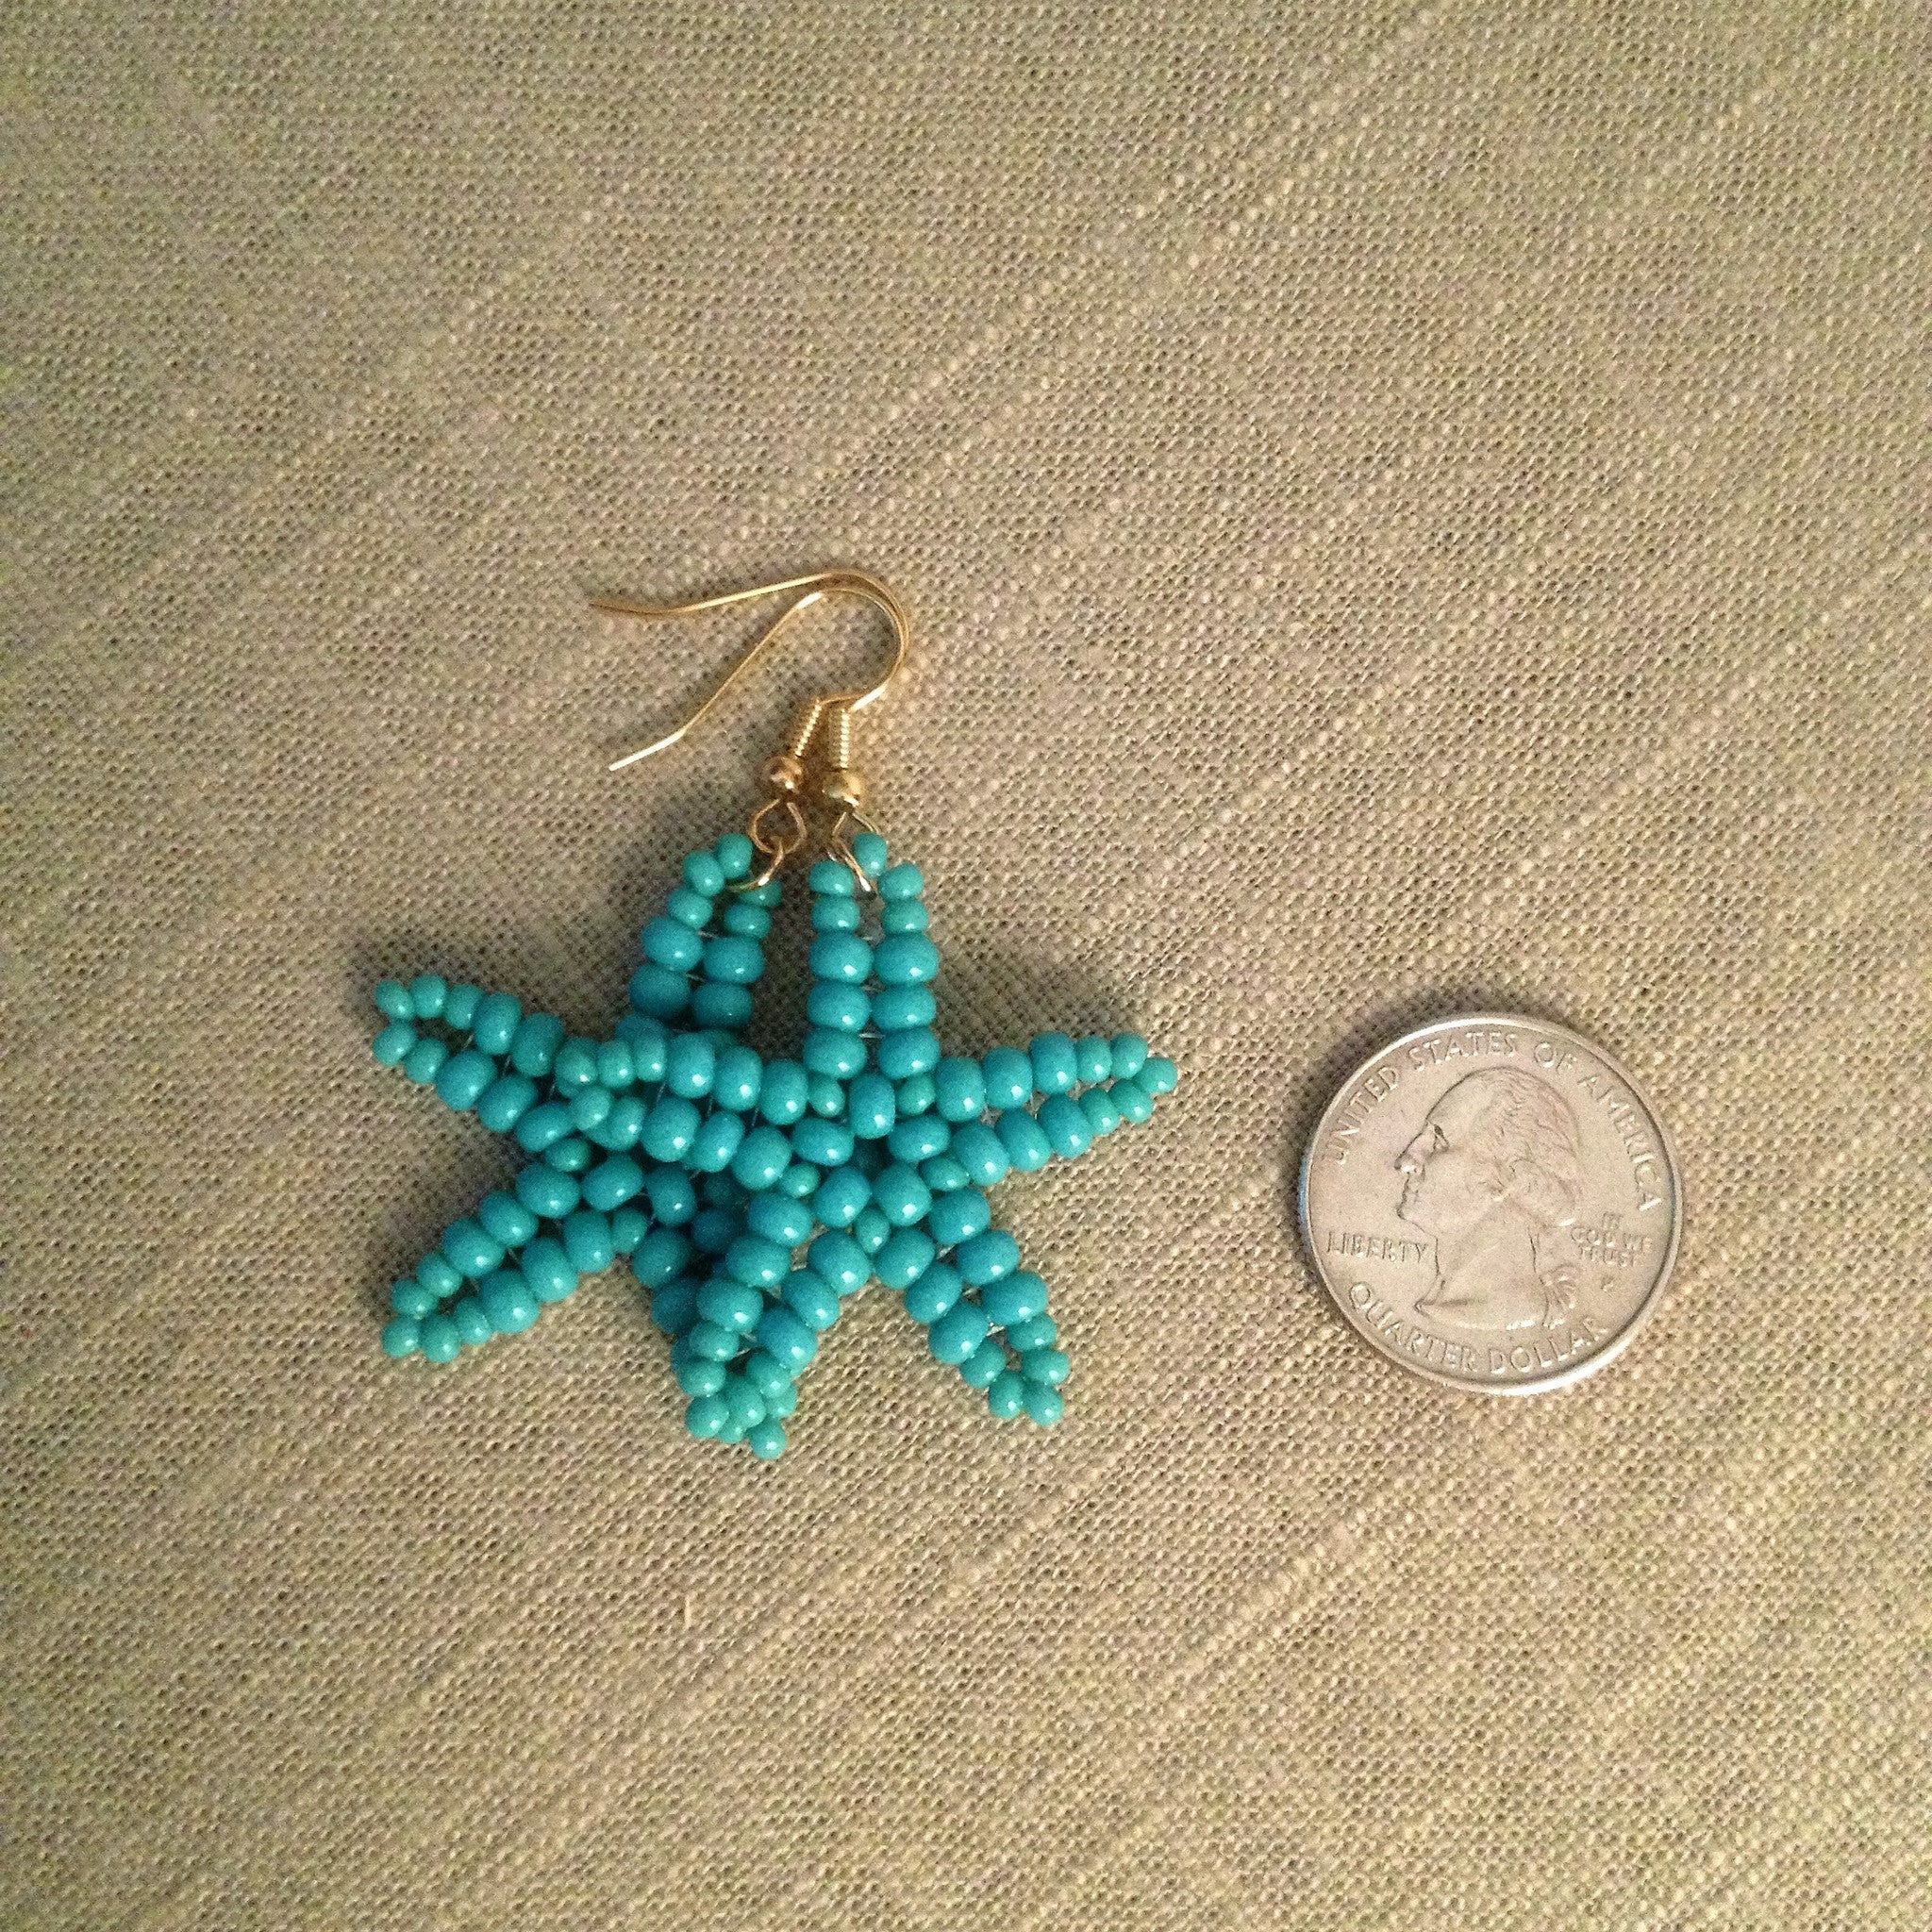 Starfish Earrings available in 17 Vibrant Colors